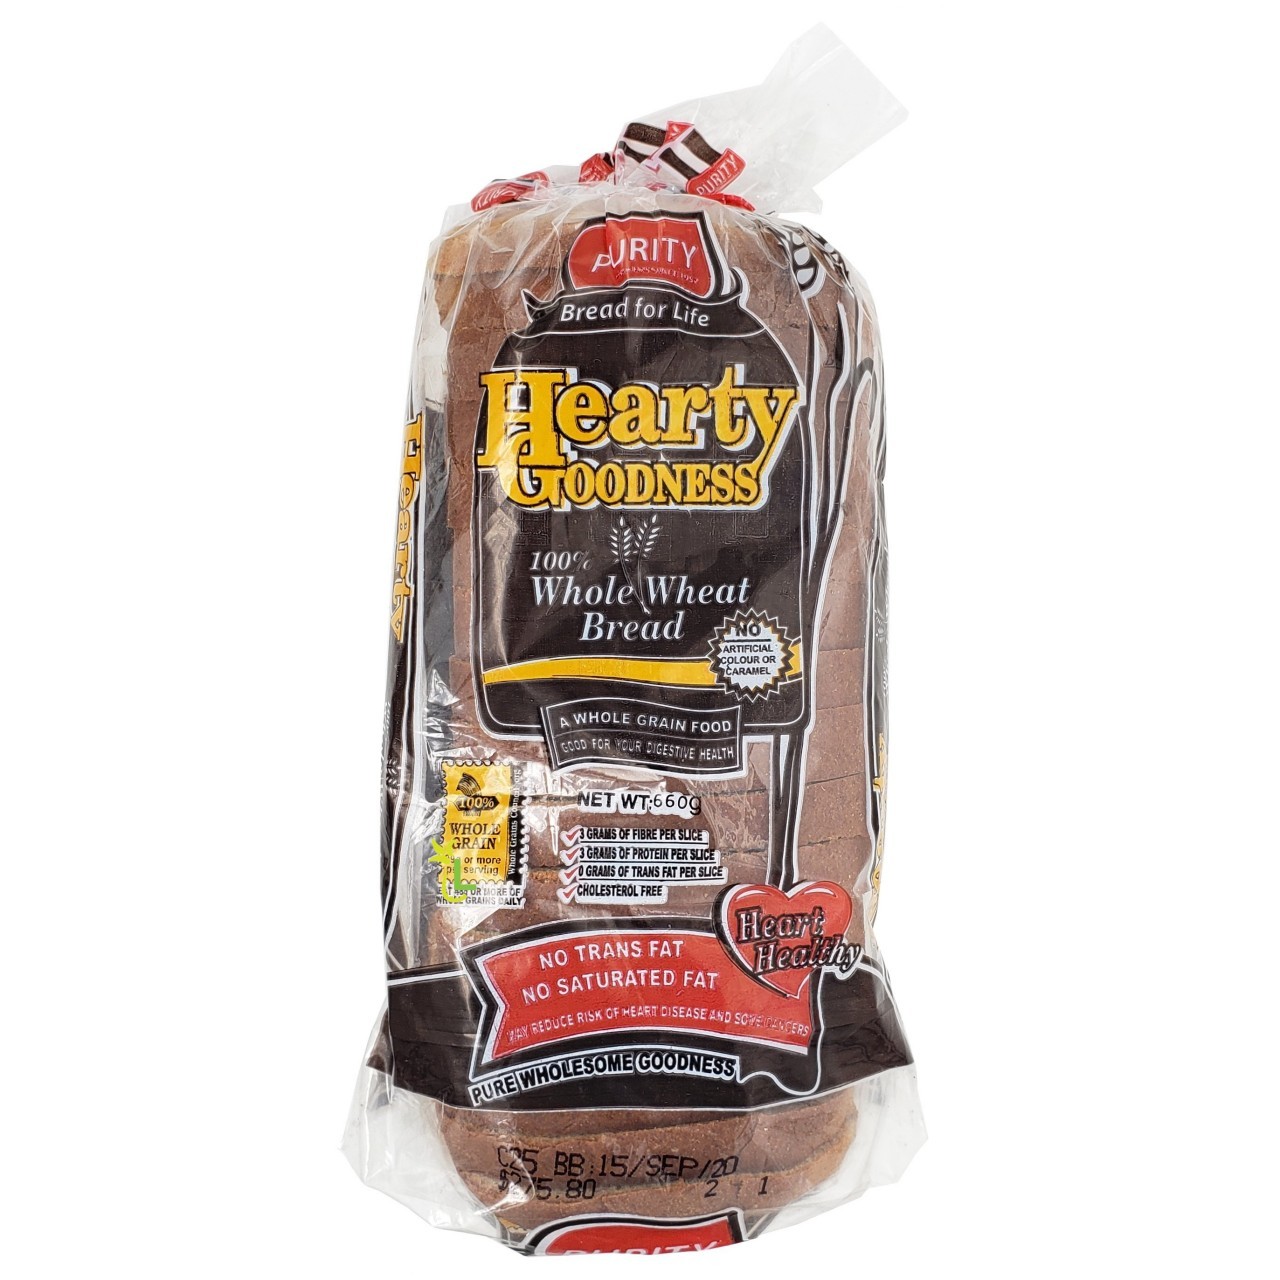 PURITY HEARTY 100% WHOLE WHEAT 660g